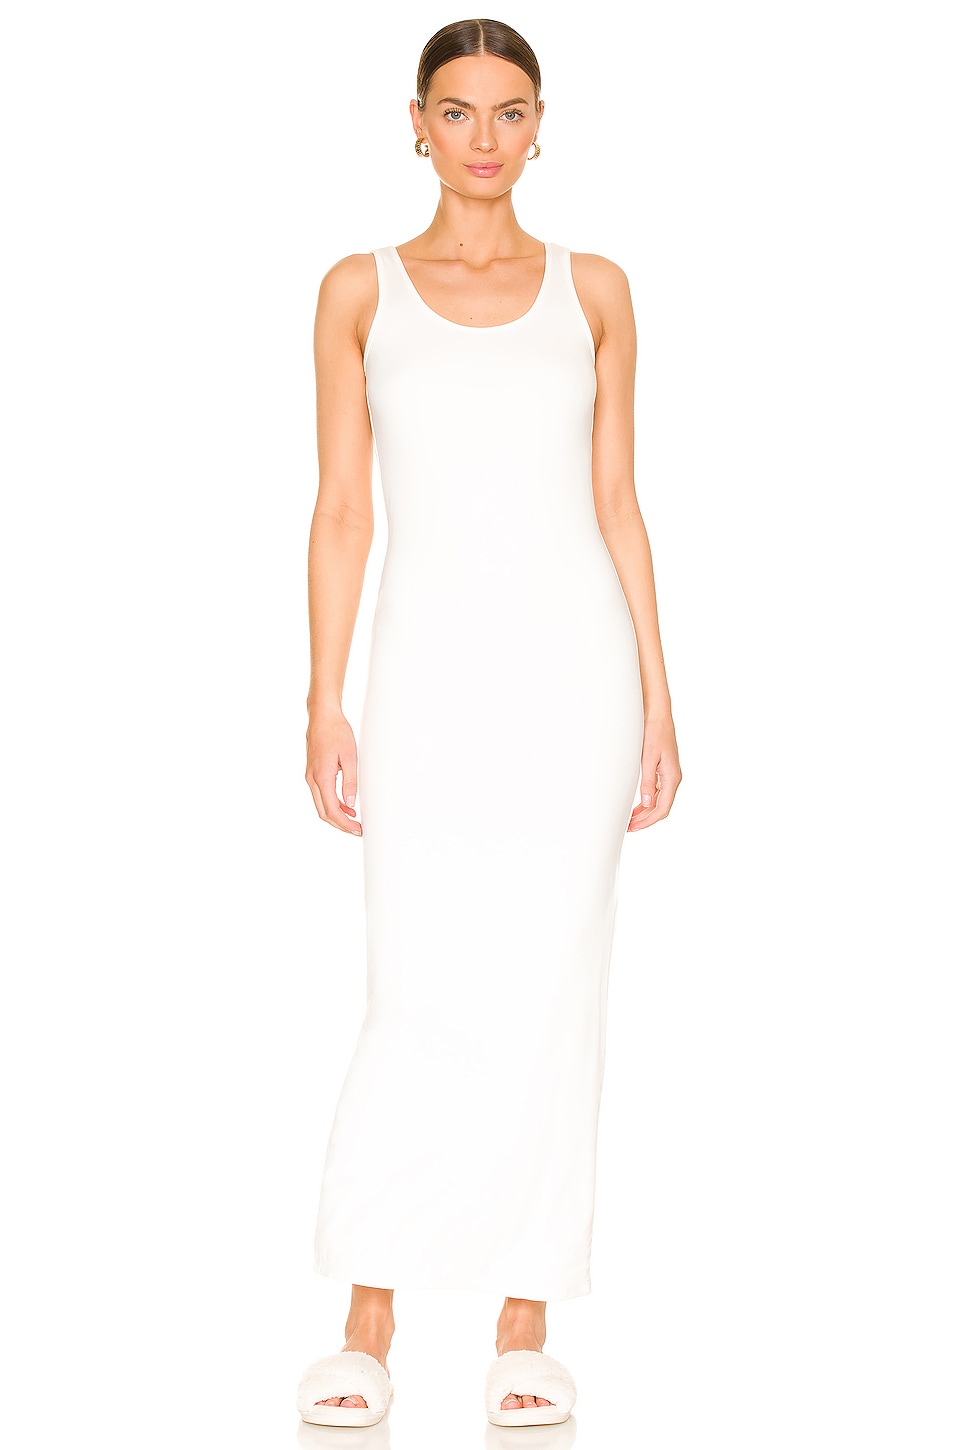 BUMPSUIT The Dress in Ivory